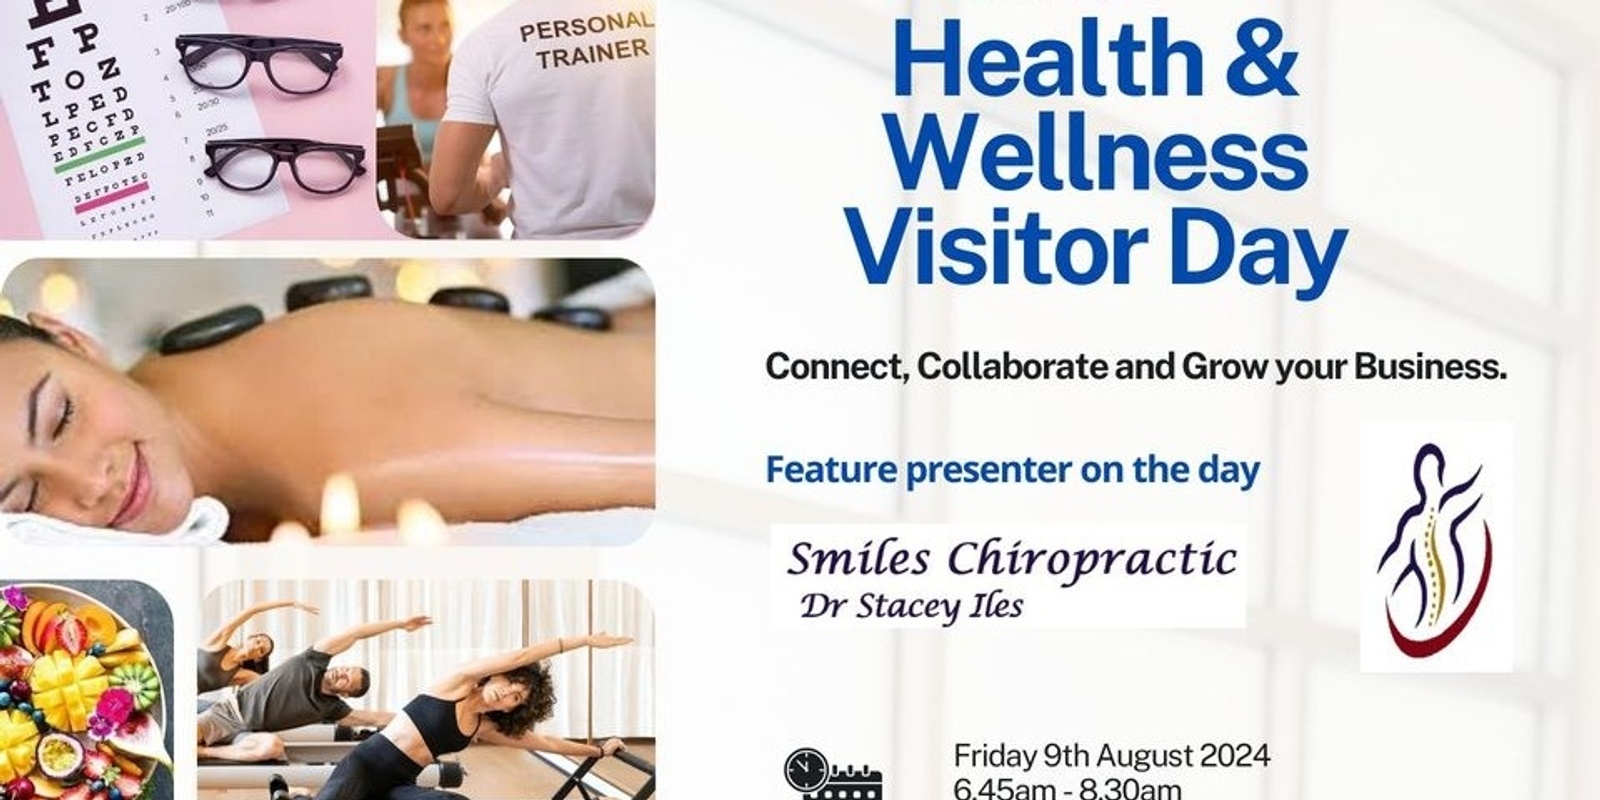 Banner image for BNI Awesome Health & Wellness Visitor Day